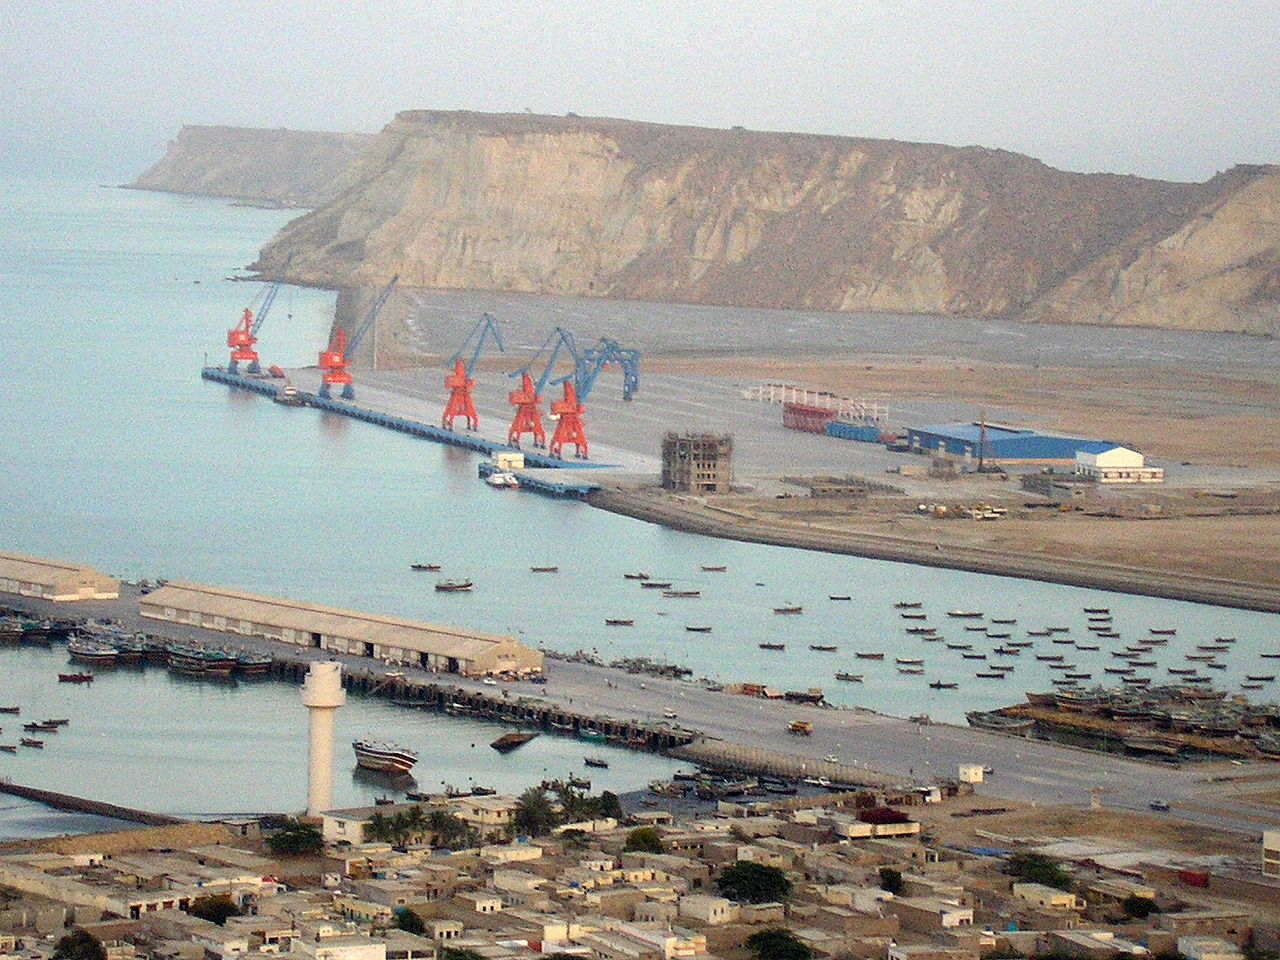 Gwadar Port in Pakistan was leased to China for 43 years, under the CPIC treaty. Photo by: J. Patrick Fischer.